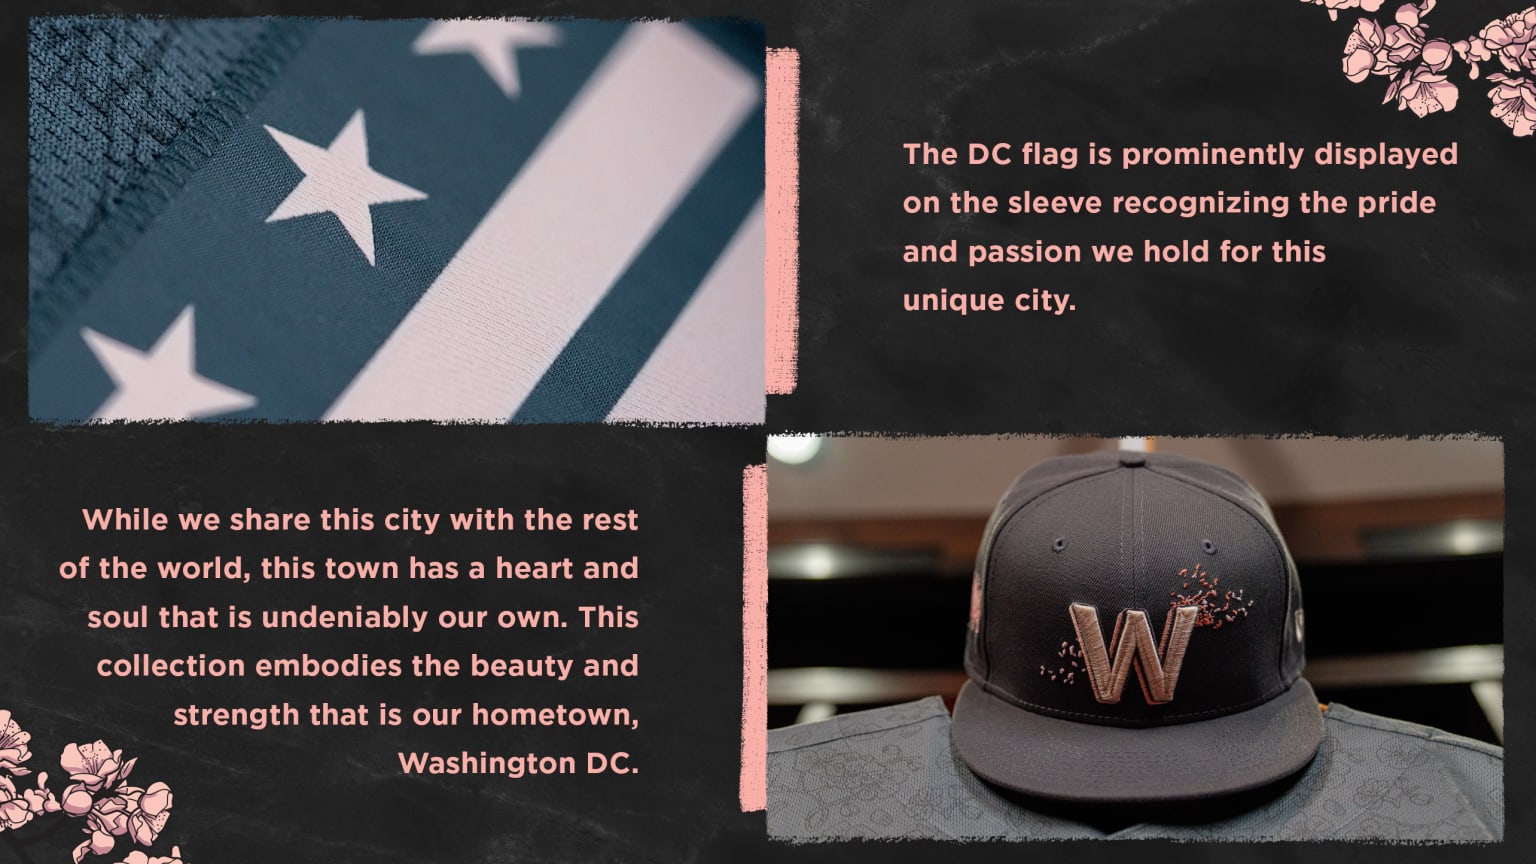 MLB - Our official review of the Washington Nationals' Nike City Connect  unis: 🌸🌸🌸🌸🌸